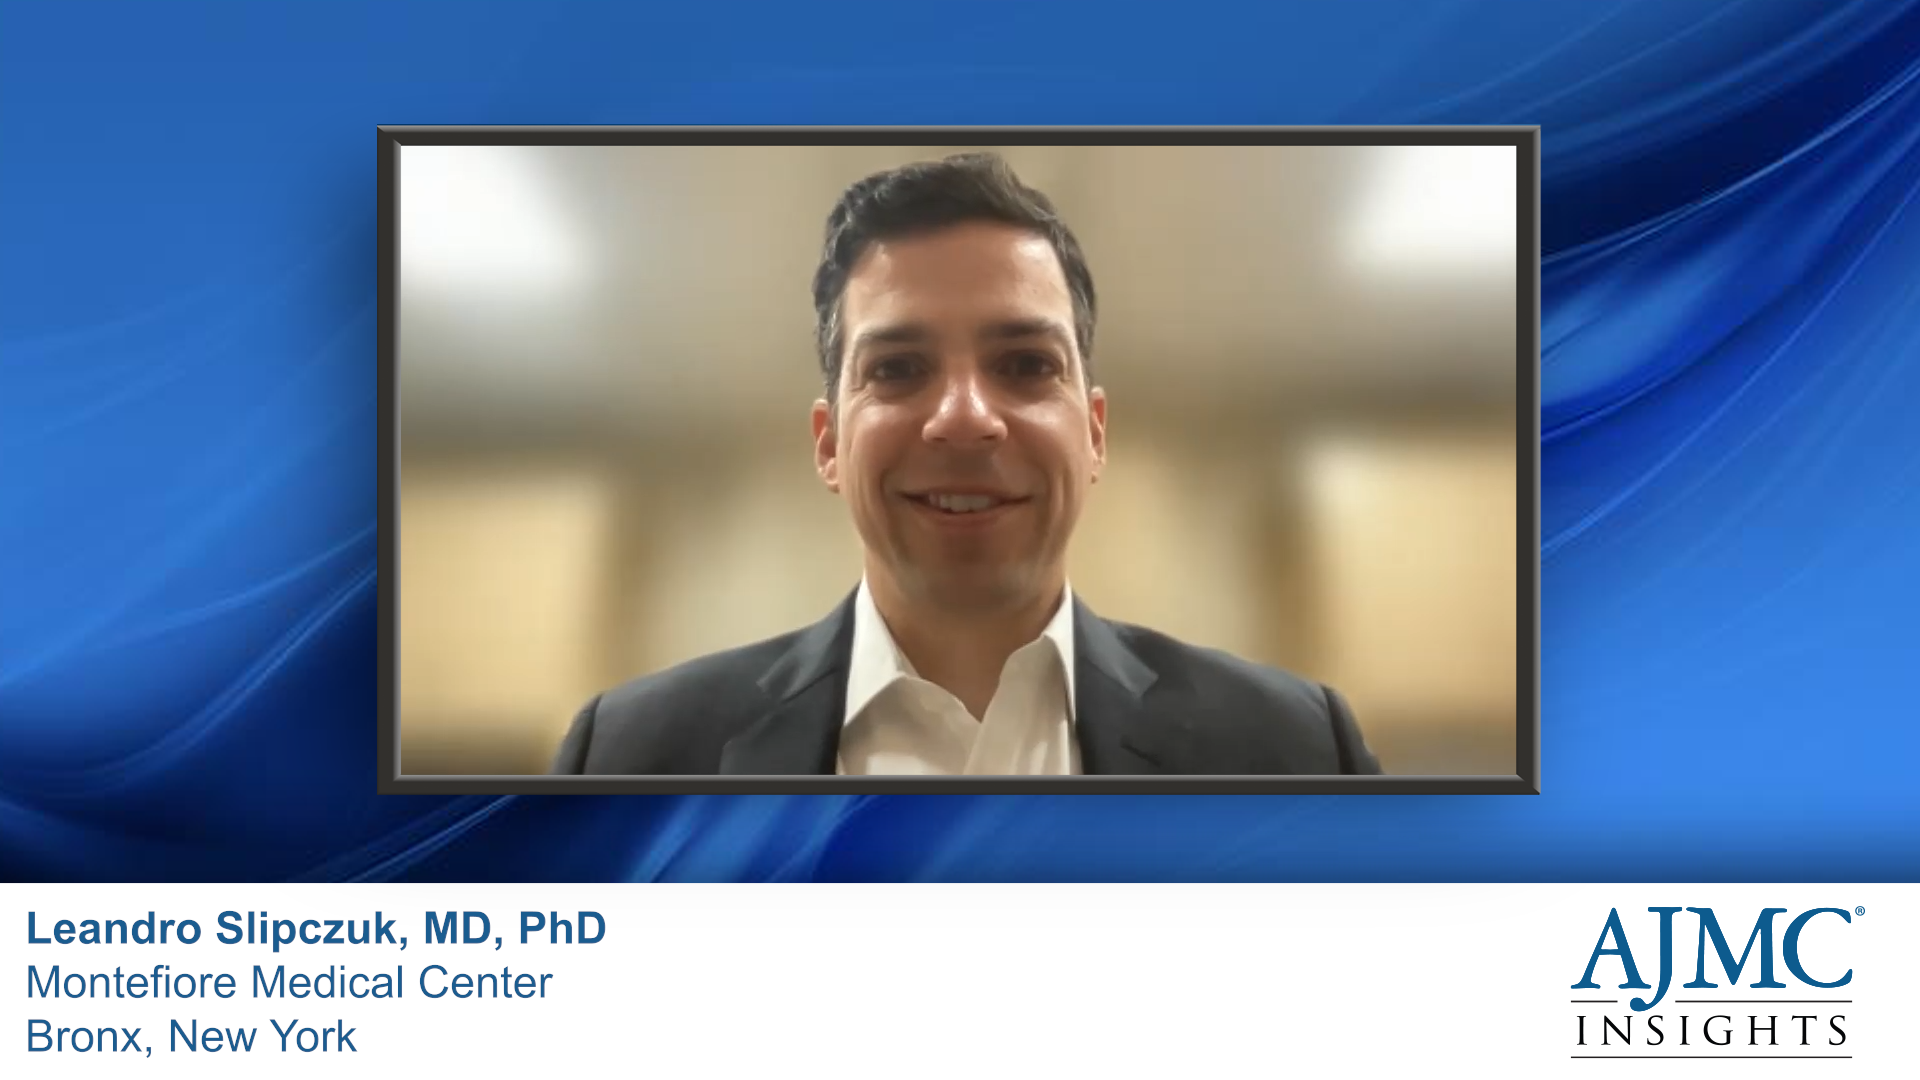 Improving Access to PCSK9 Inhibitors in the Inpatient Setting